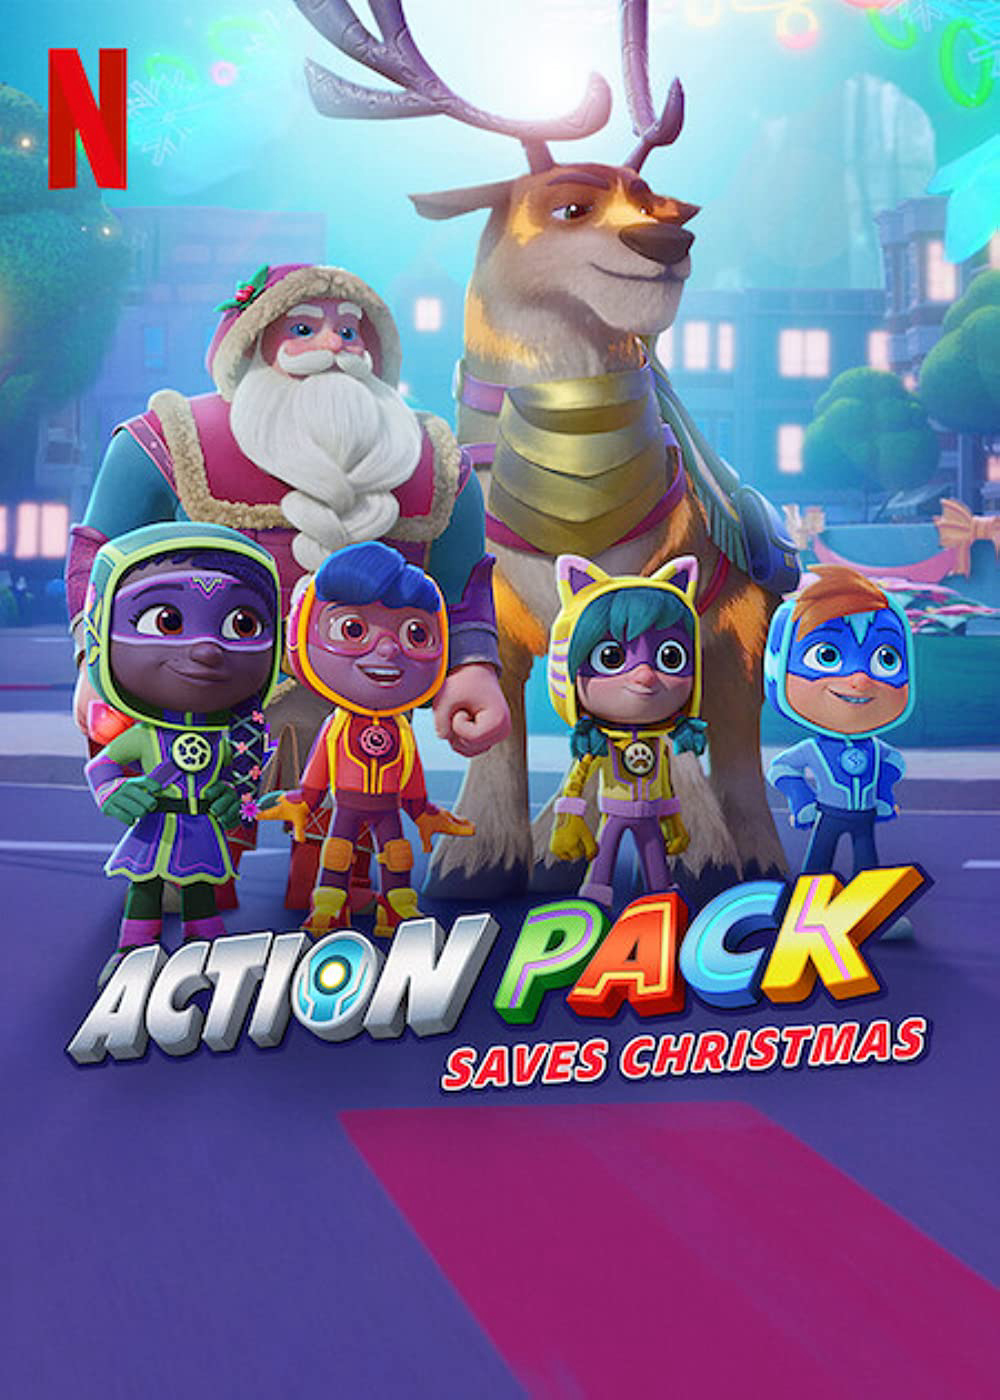 Action Pack giải cứu Giáng sinh Vietsub The Action Pack Saves Christmas Vietsub